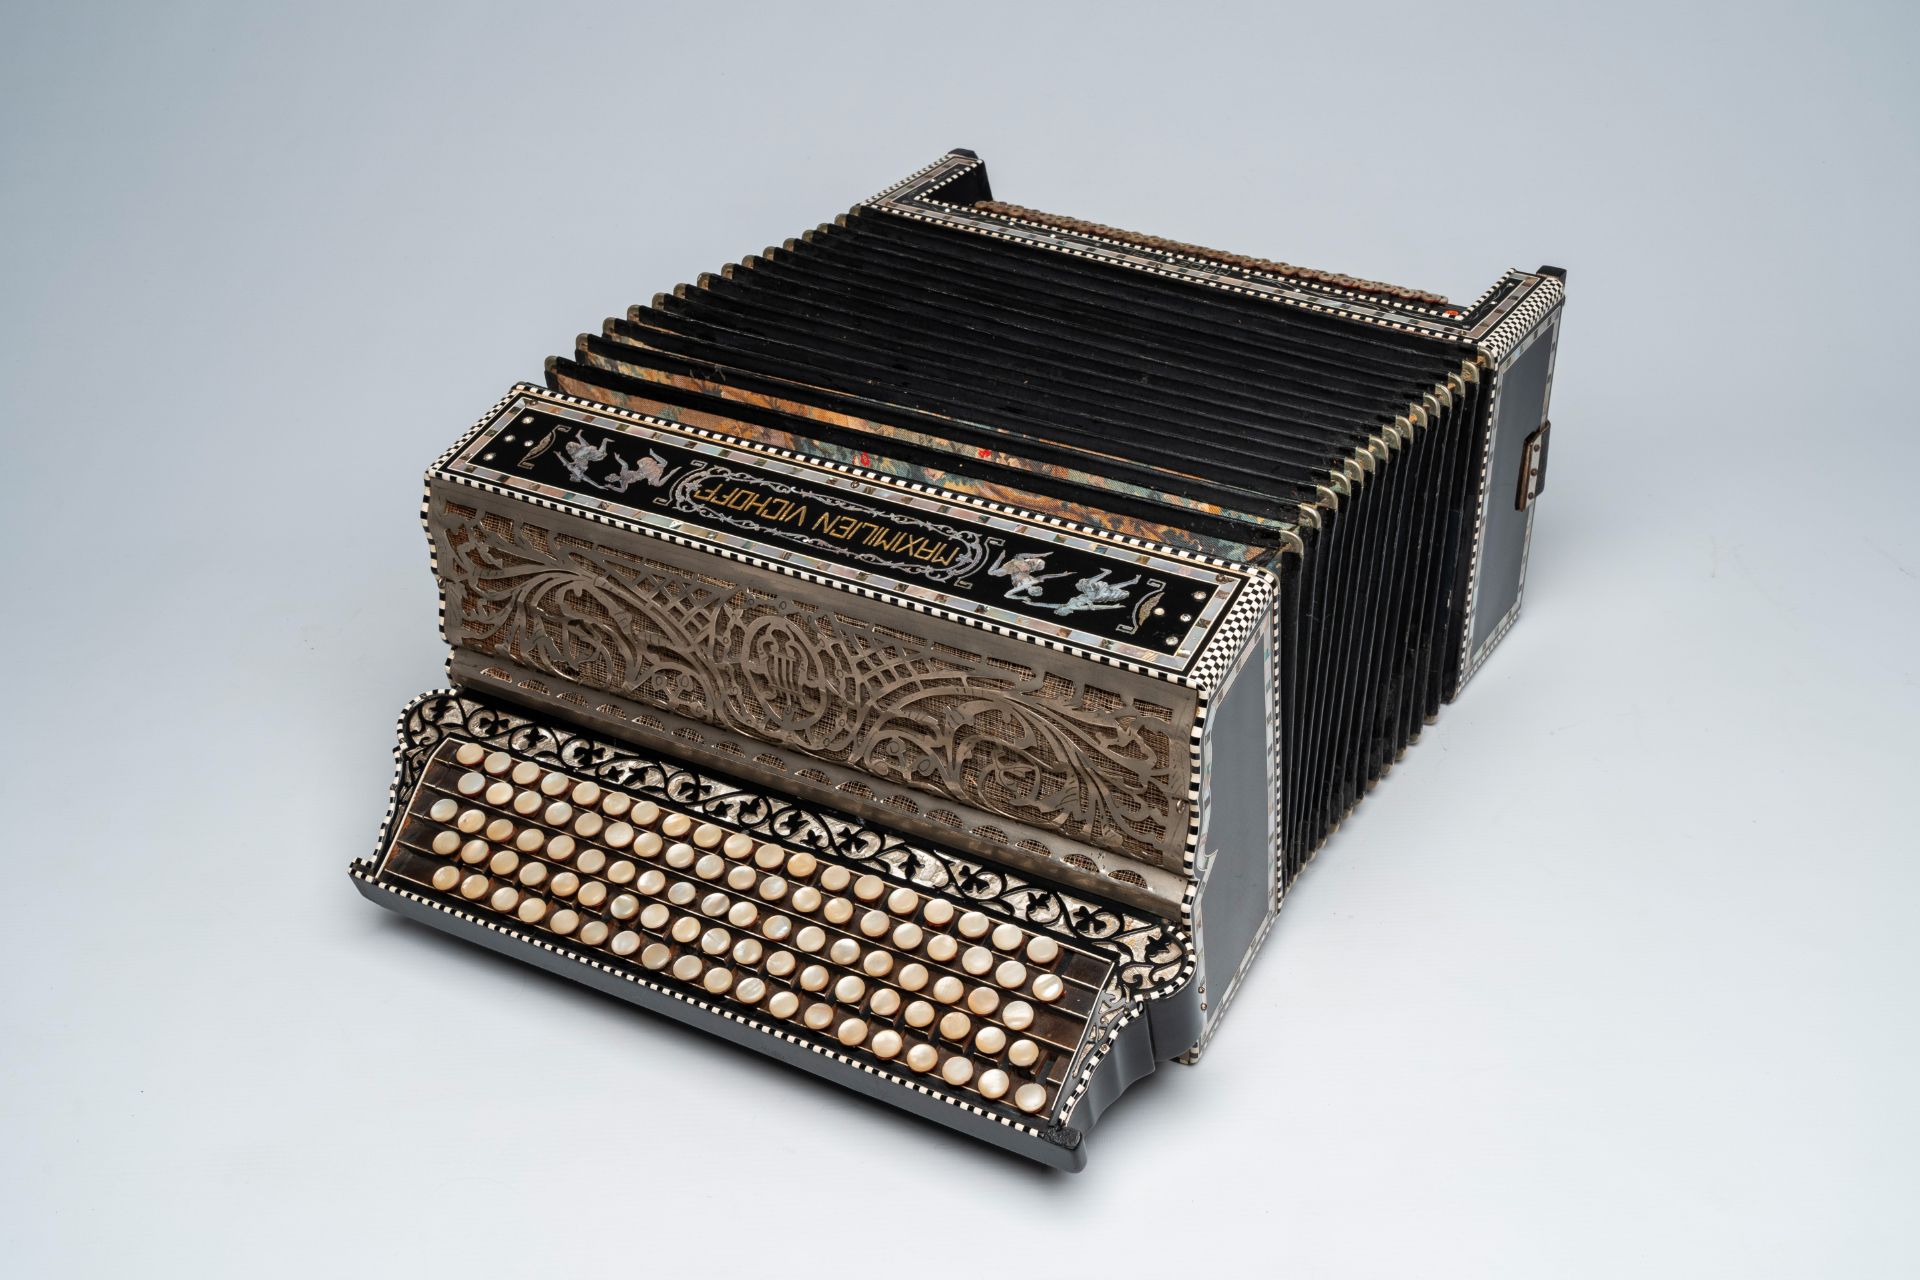 An Italian 'Maximilien Vichoff' chromatic accordion with button keyboard and box, ca. 1930 - Image 5 of 6